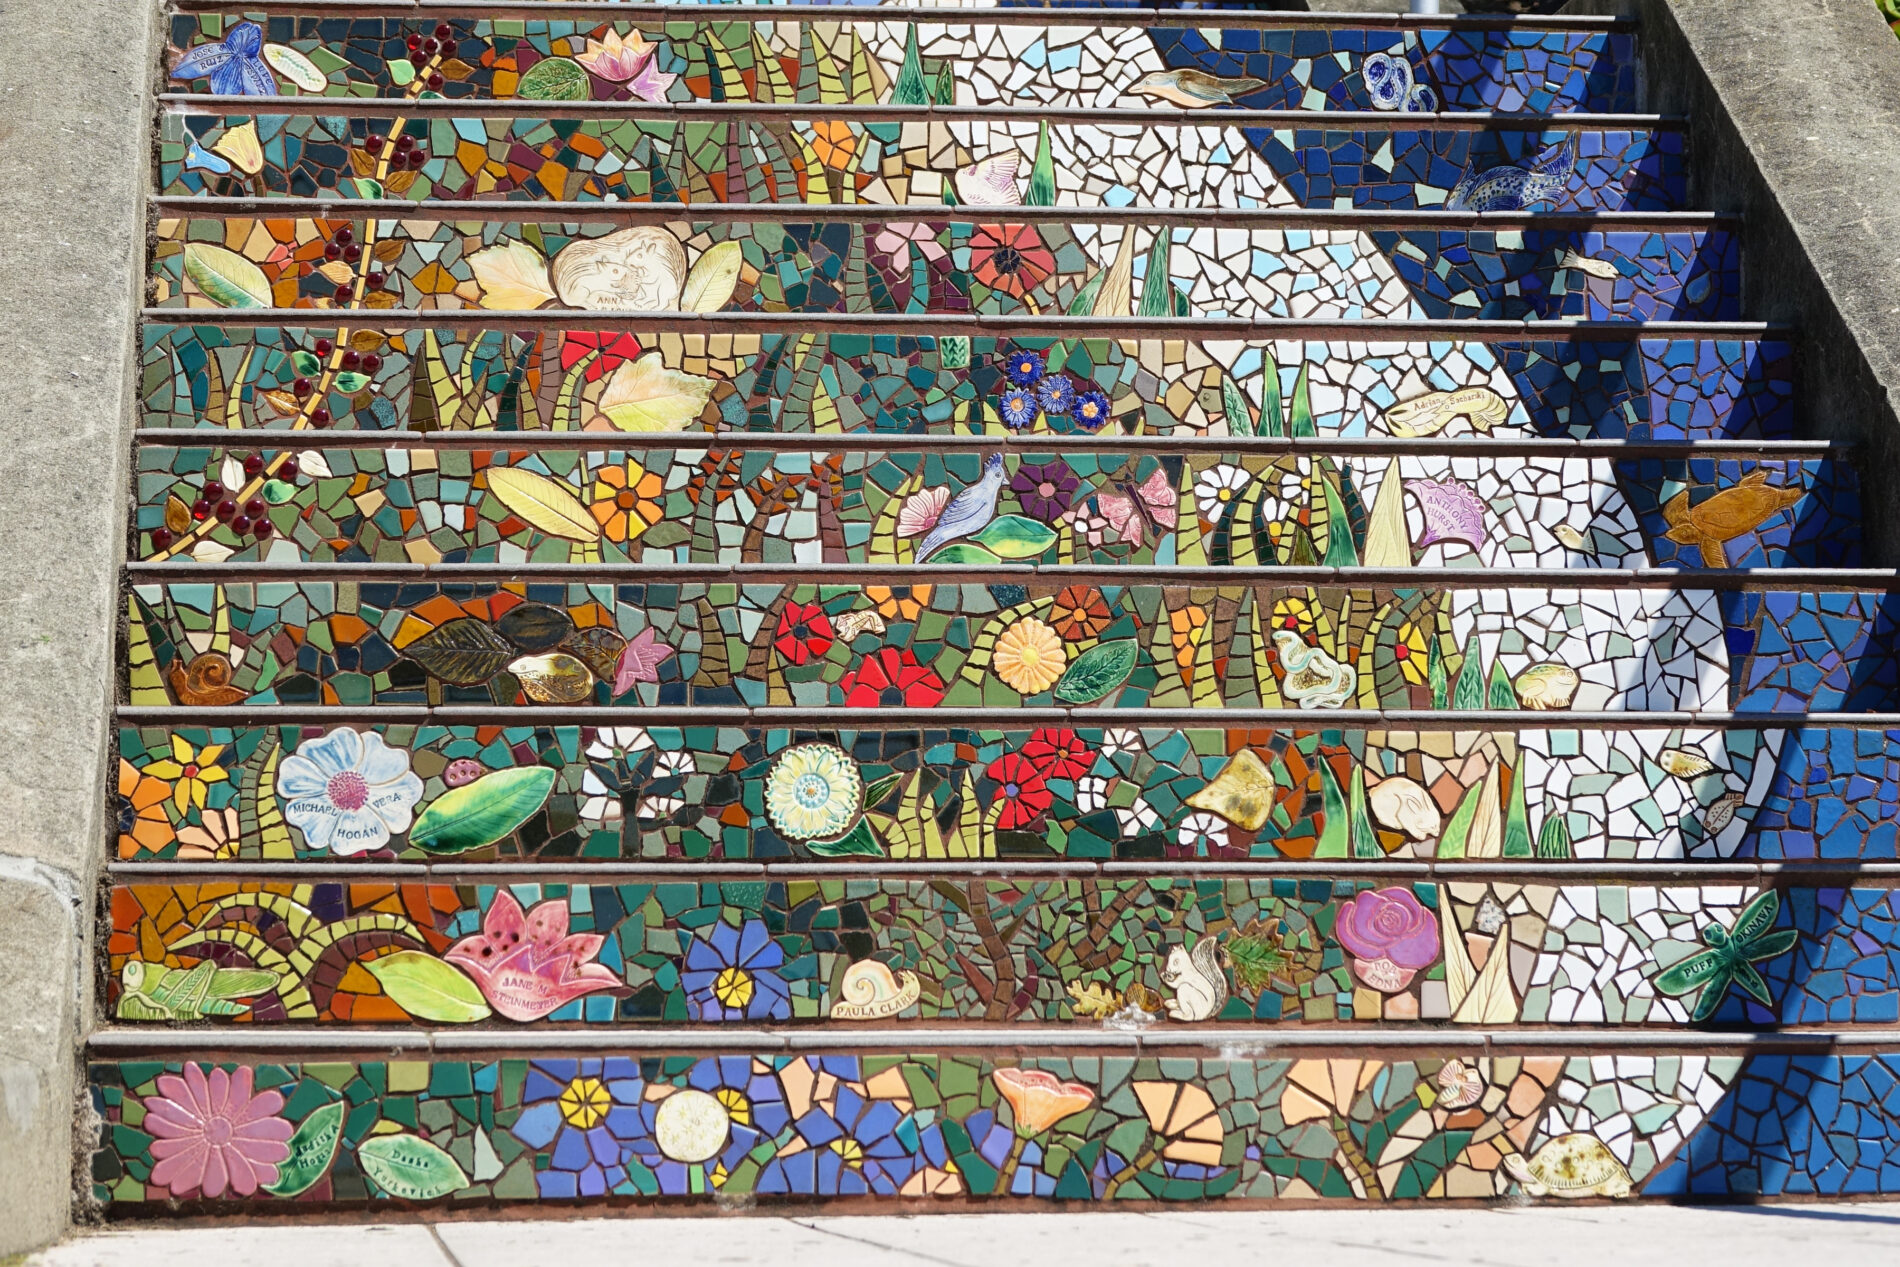 A closeup view of the woodland scene with flowers and small critters in the mosaic tiles on 16th Avenue Steps in San Francisco.